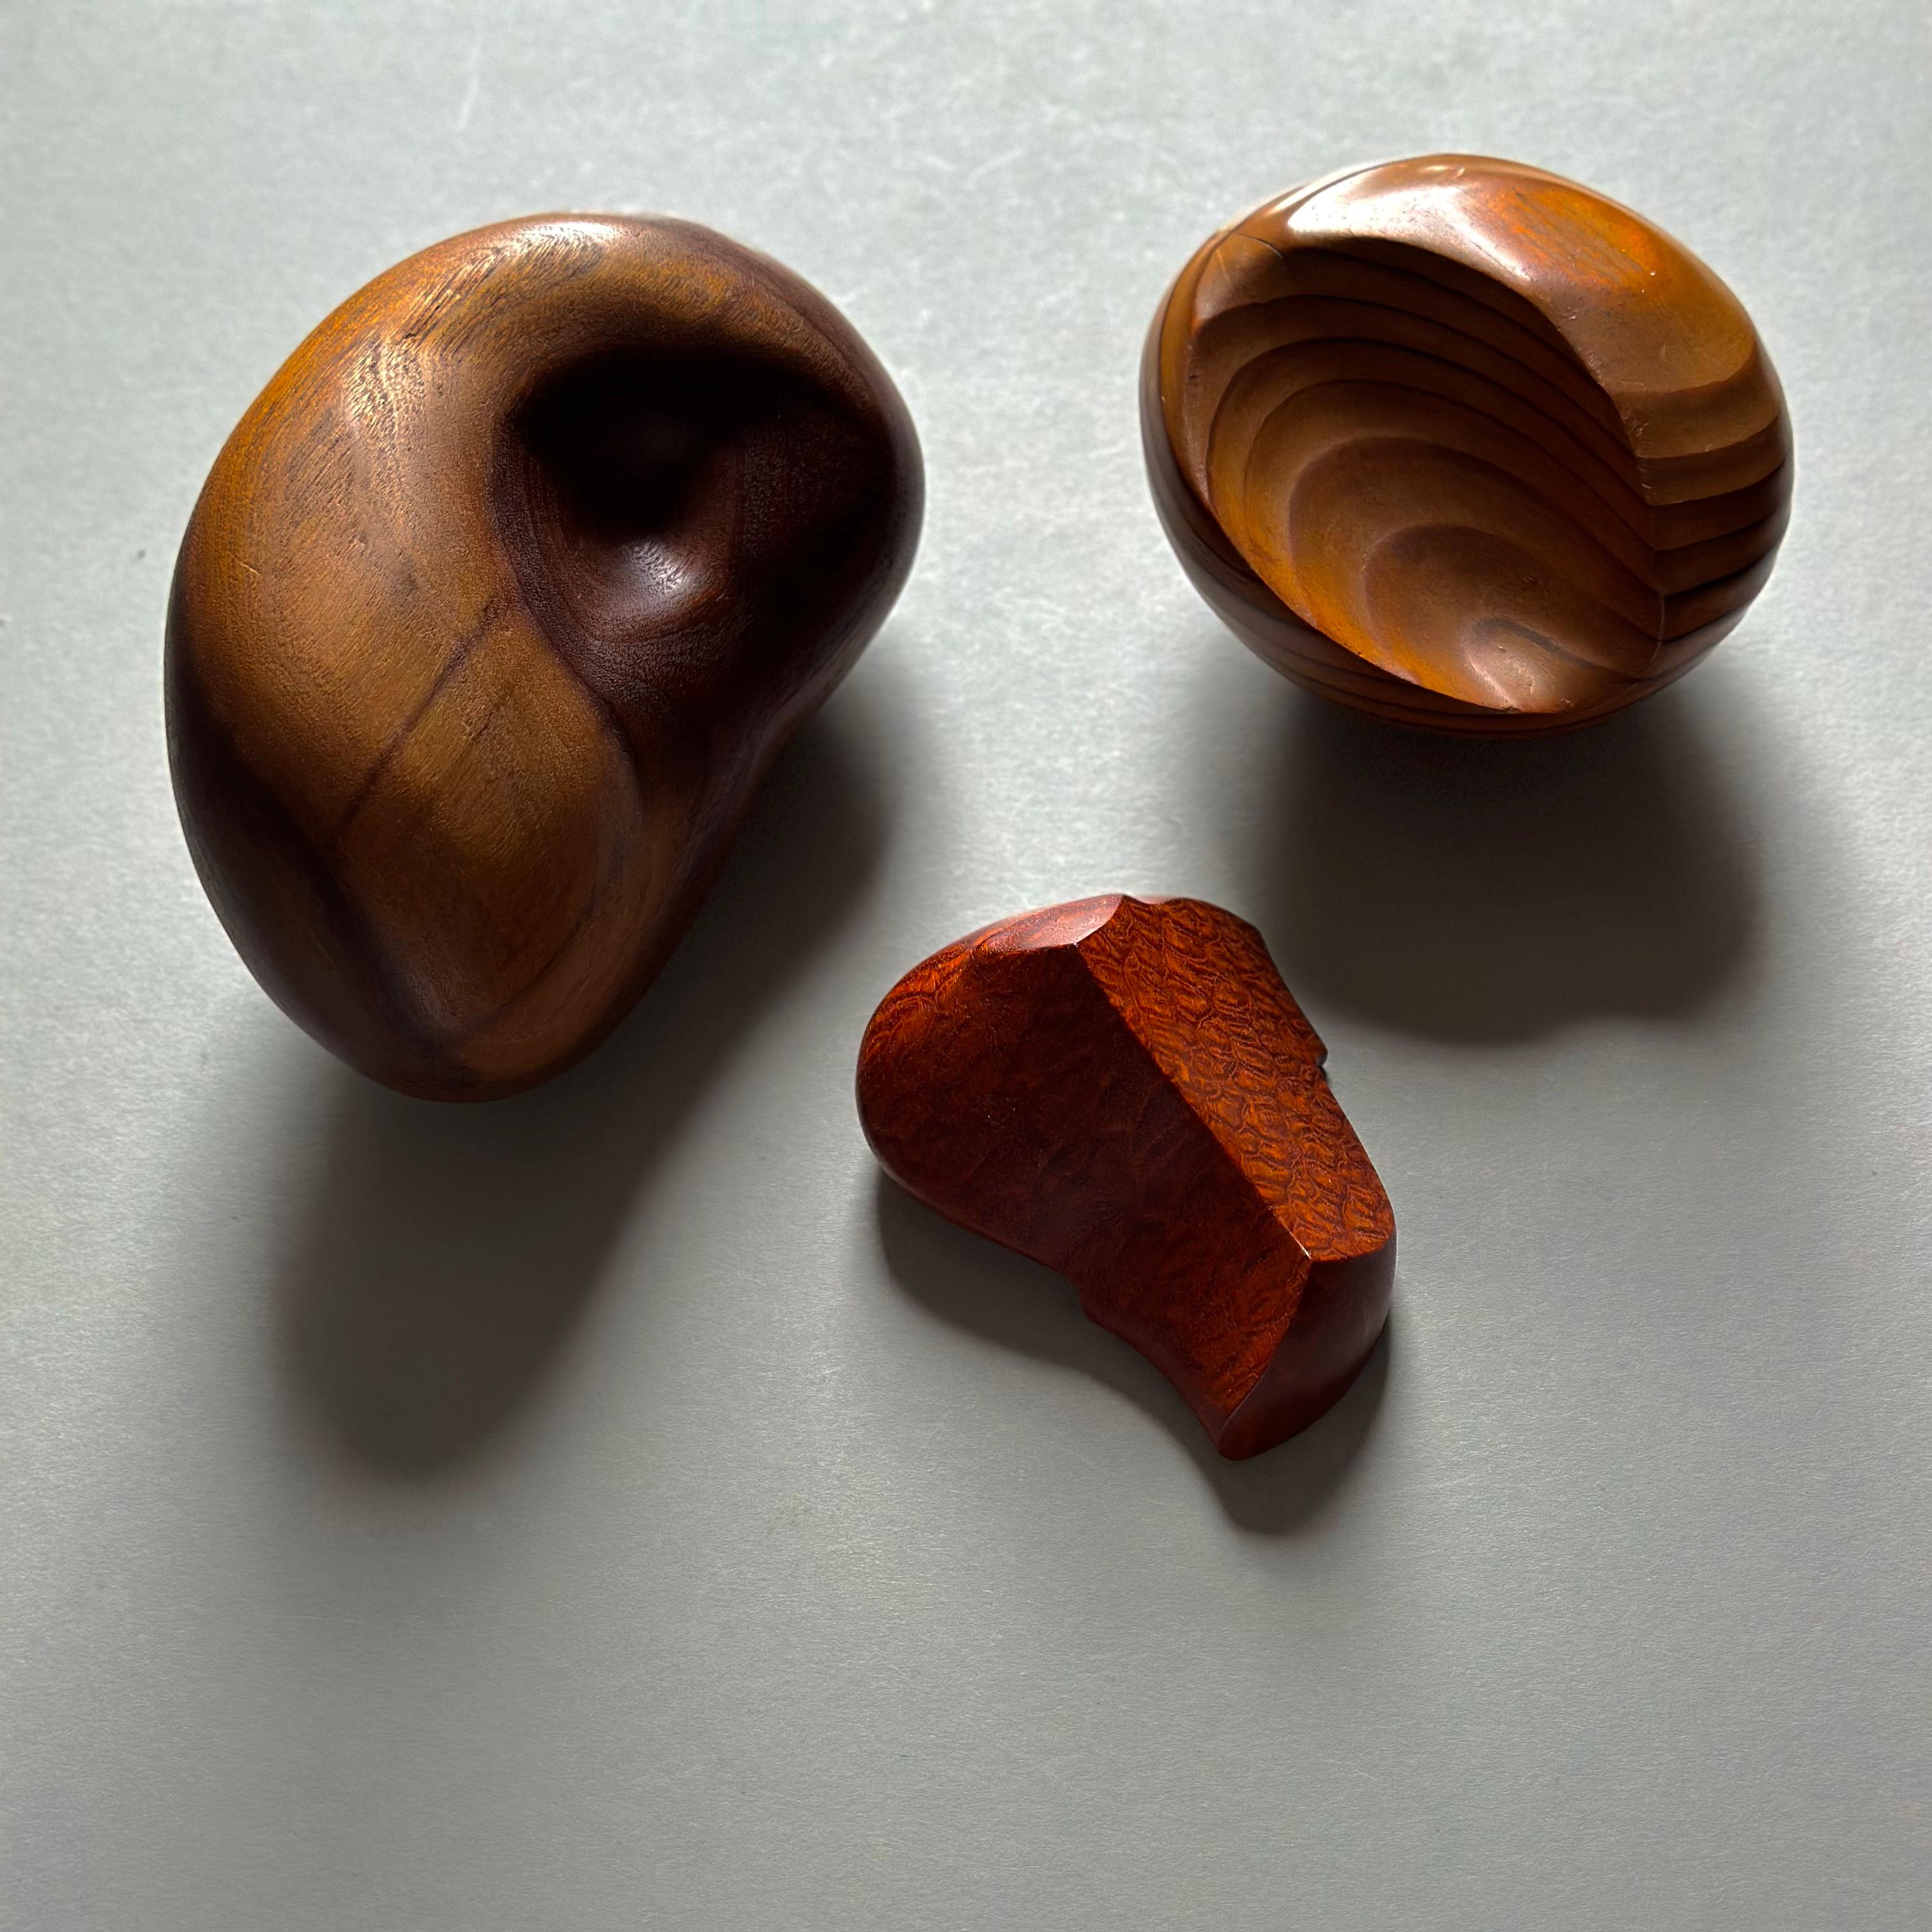 Organic Modern Three Form Studies in Dialogue: Set of Modernist Wood Sculptures For Sale